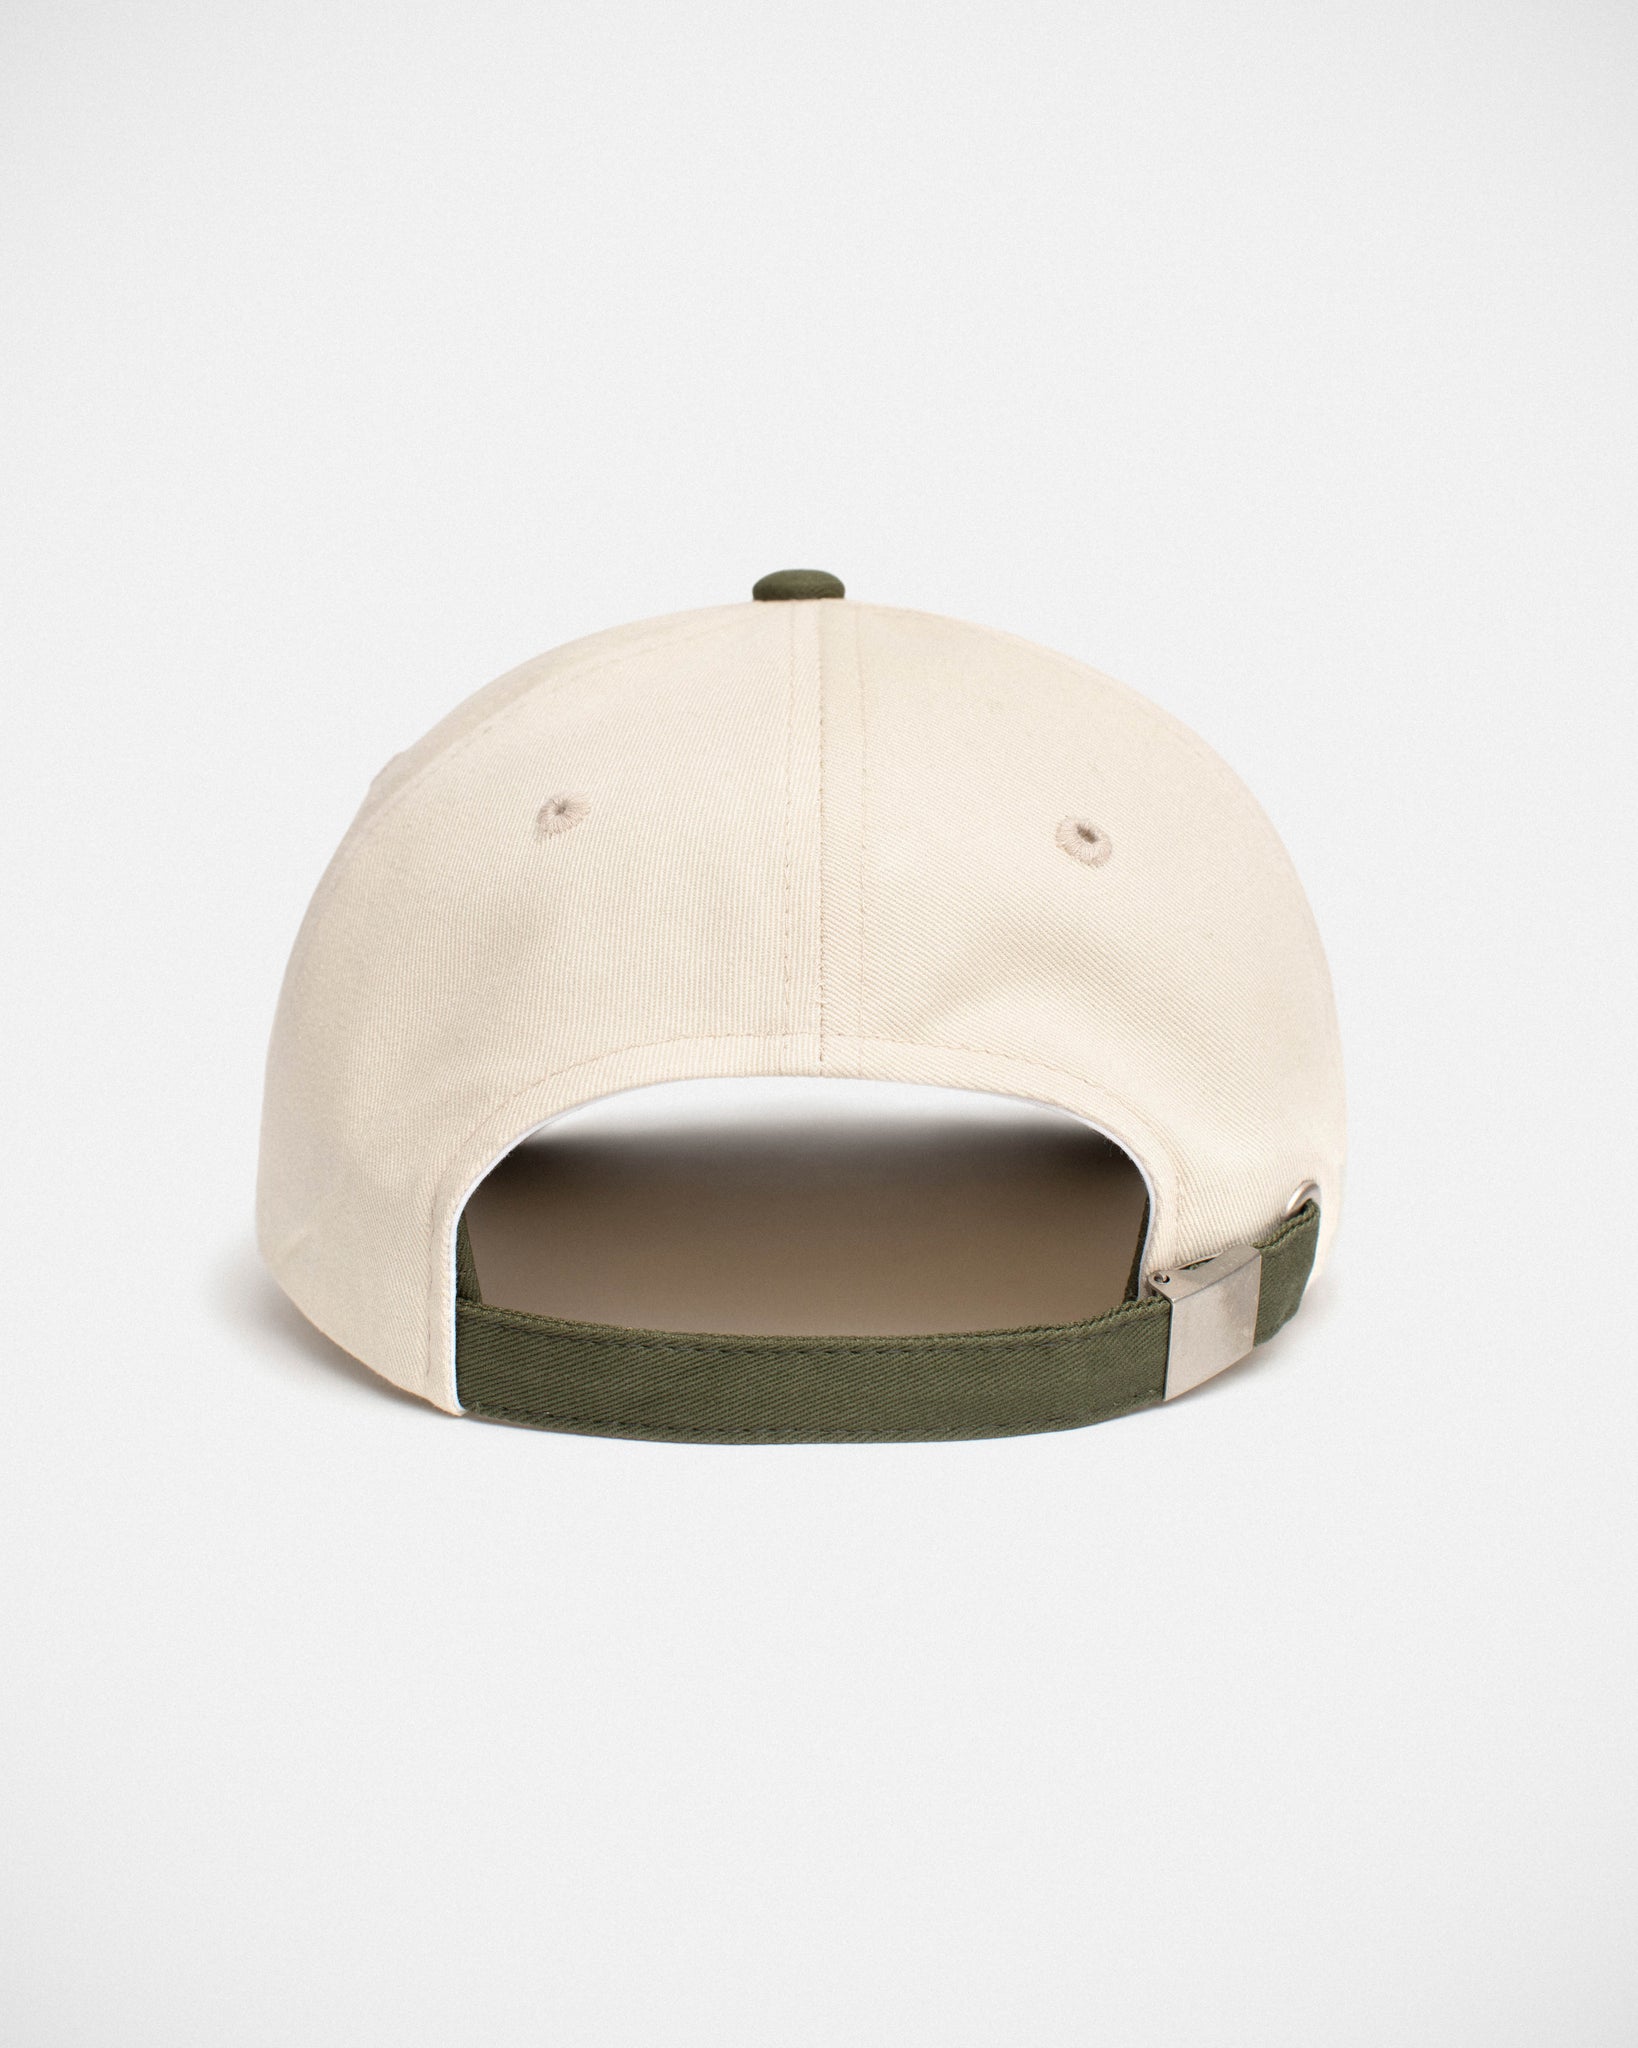 Turtle Hat - Olive/Natural White